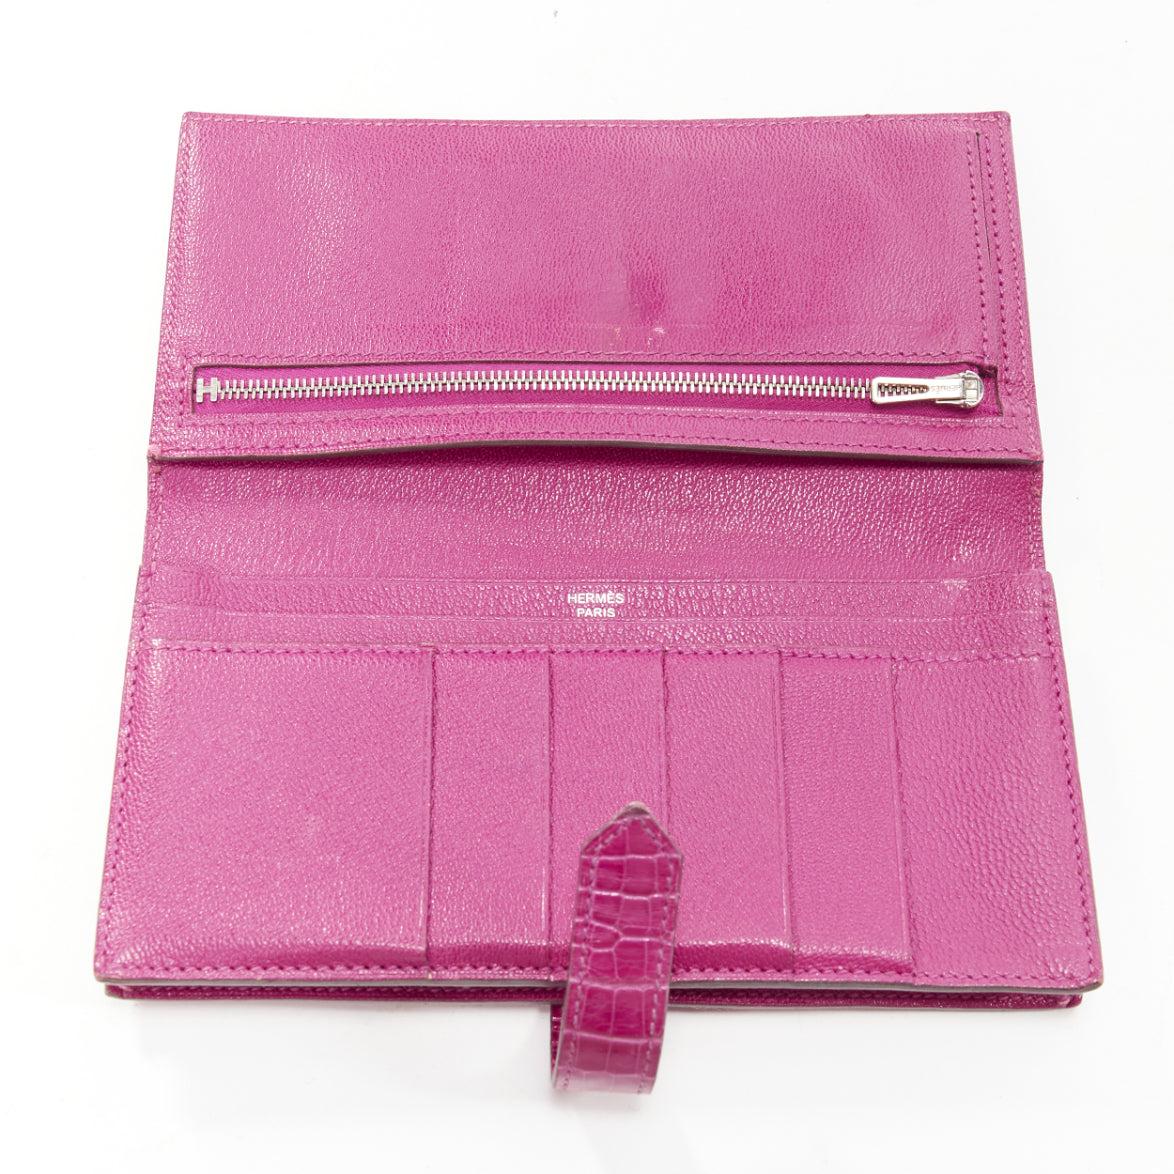 HERMES Bearne Soufflet Rose purple shiny scaled leather H silver logo long wallet
Reference: AAWC/A00986
Brand: Hermes
Model: Bearn
Material: Leather
Color: Purple, Silver
Pattern: Animal Print
Closure: Loop Through
Lining: Purple Leather
Extra